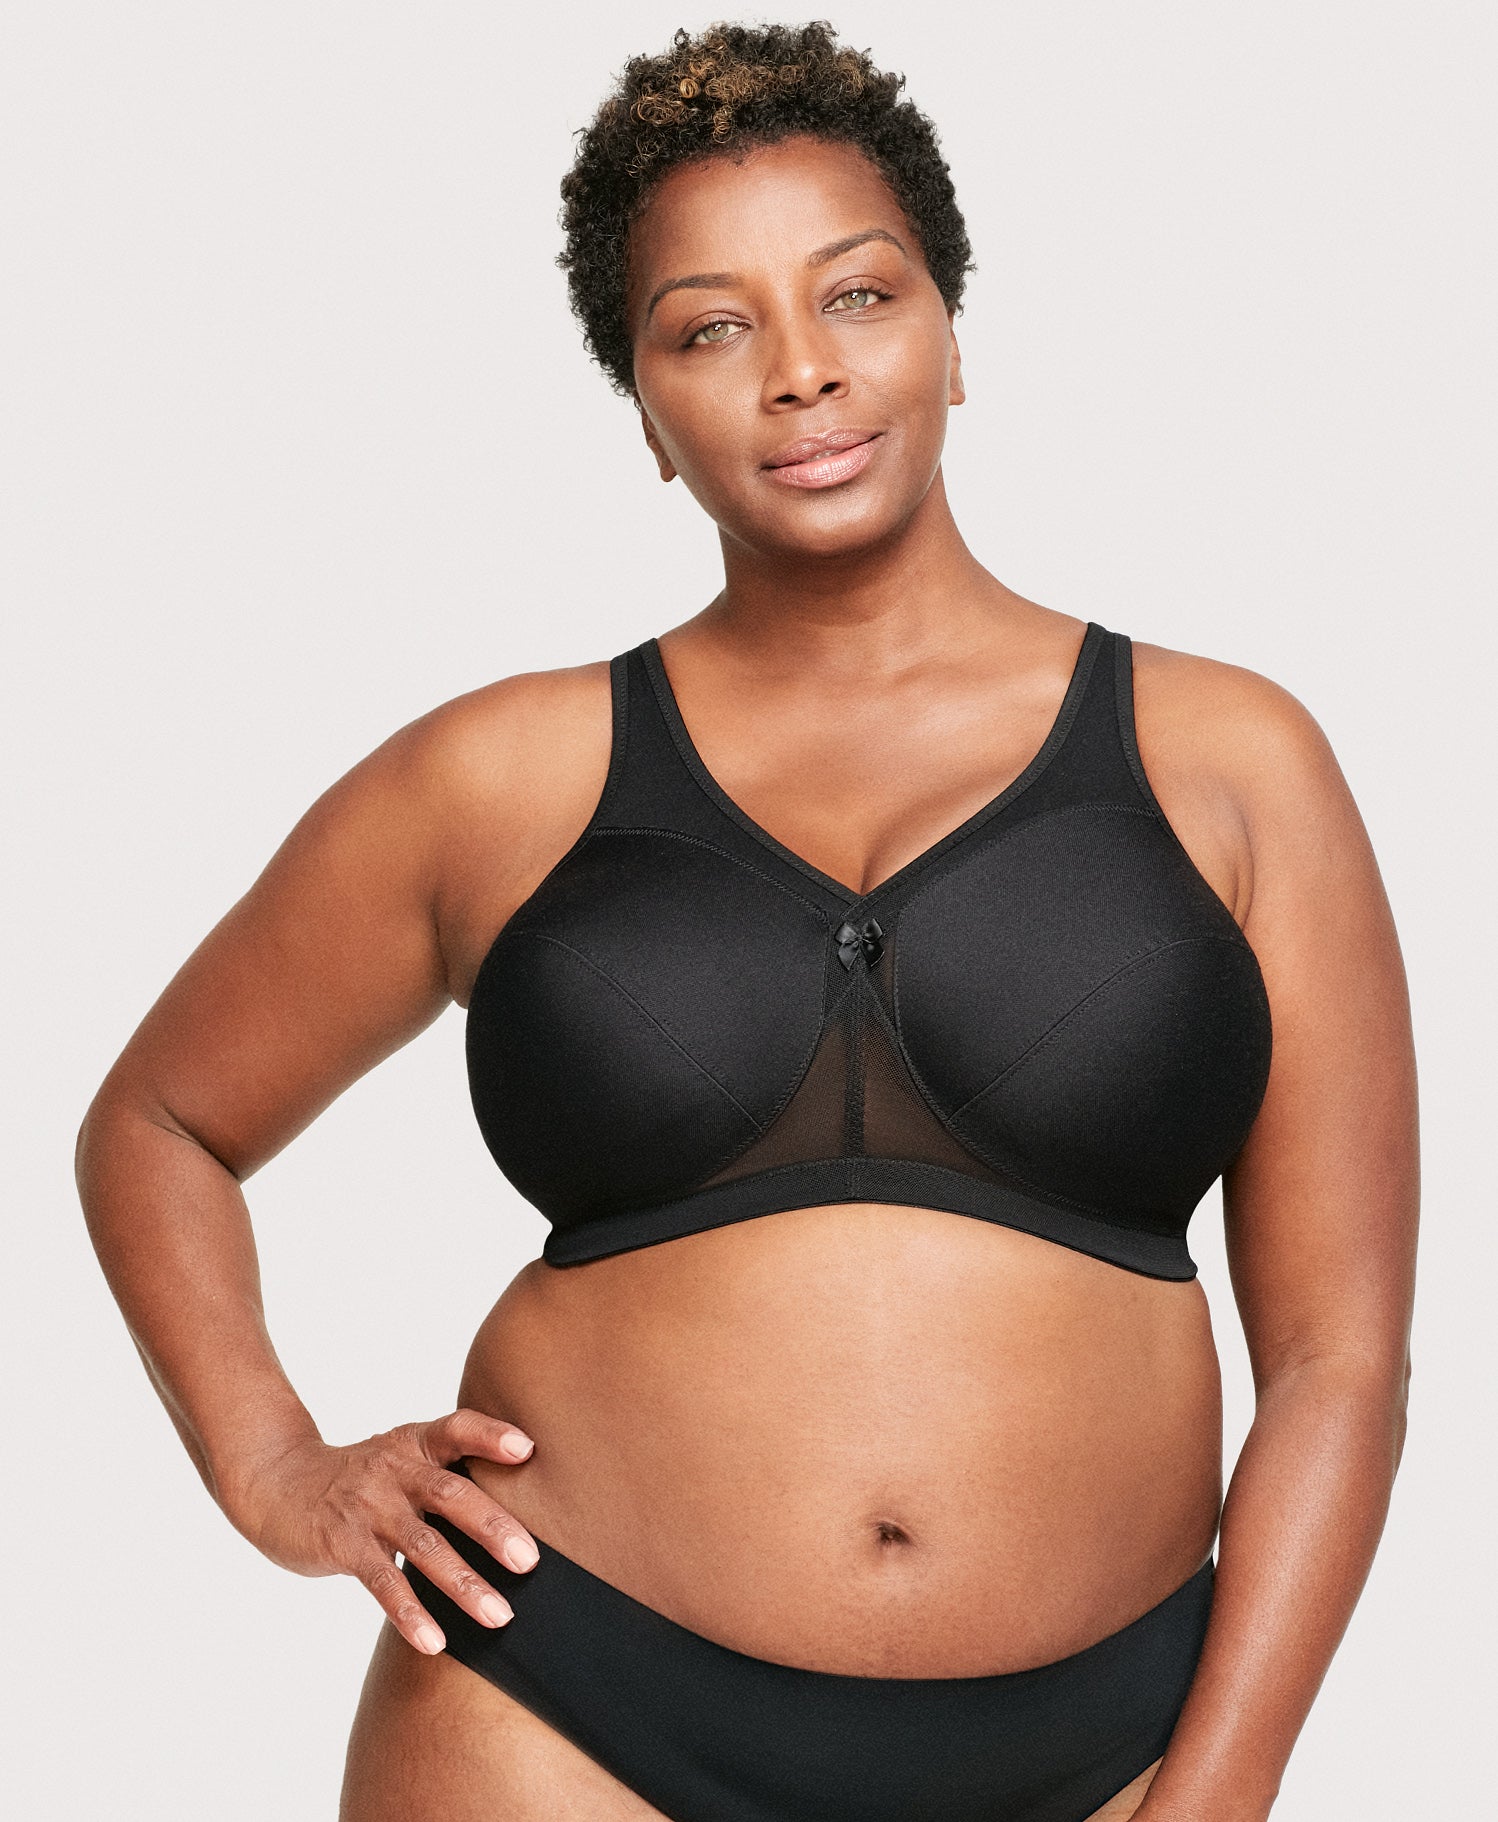 MagicLift Active Support Bra Black